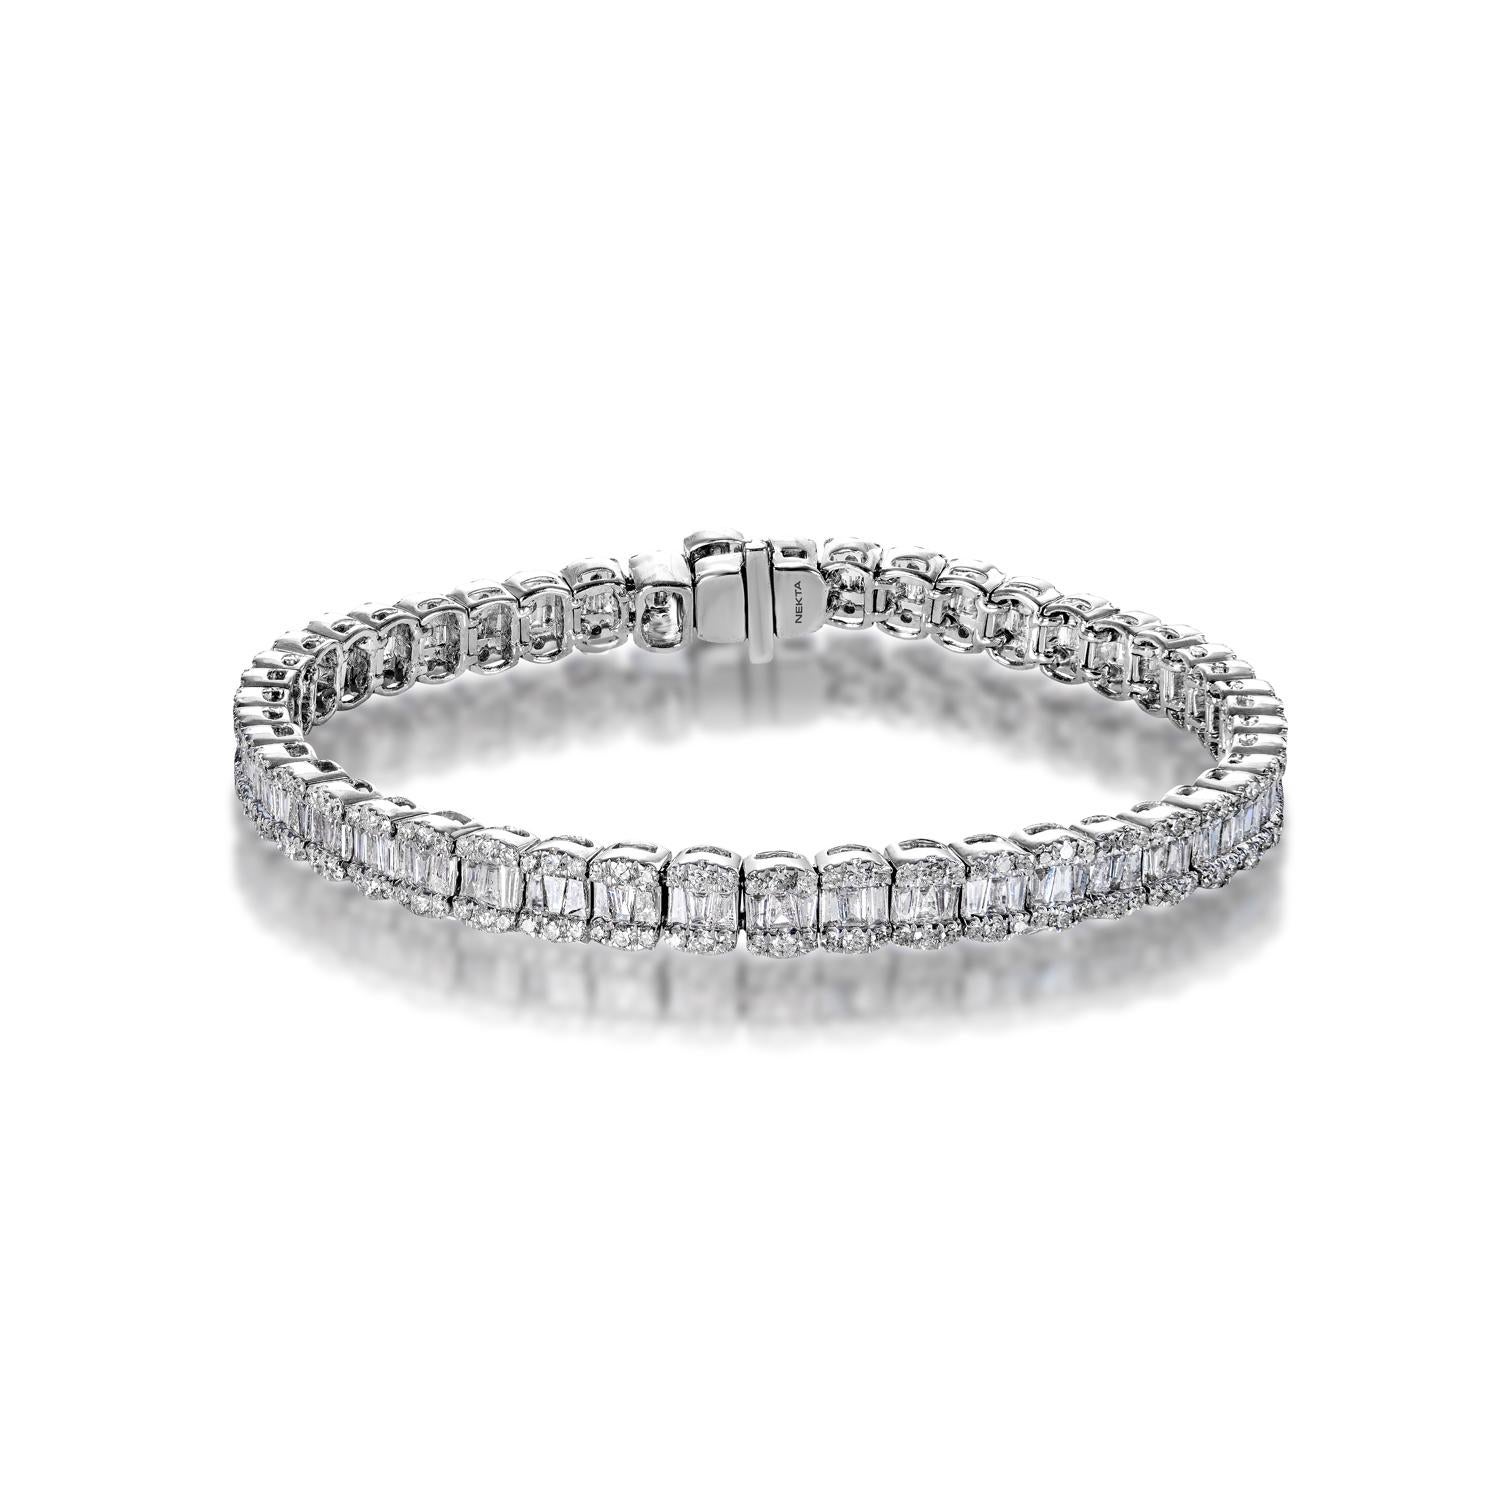 Style: Single Row Diamond Tennis Bracelet for Ladies
Diamonds
Diamond Size: 6.40 Carats
Diamond Shape: Combine Mix Shape

Setting: Miracle Set
Metal: 14 Karat White Gold 21.90 grams
Clasp: Box catch with hidden safety

Total Carat Weight: 6.40 Carats